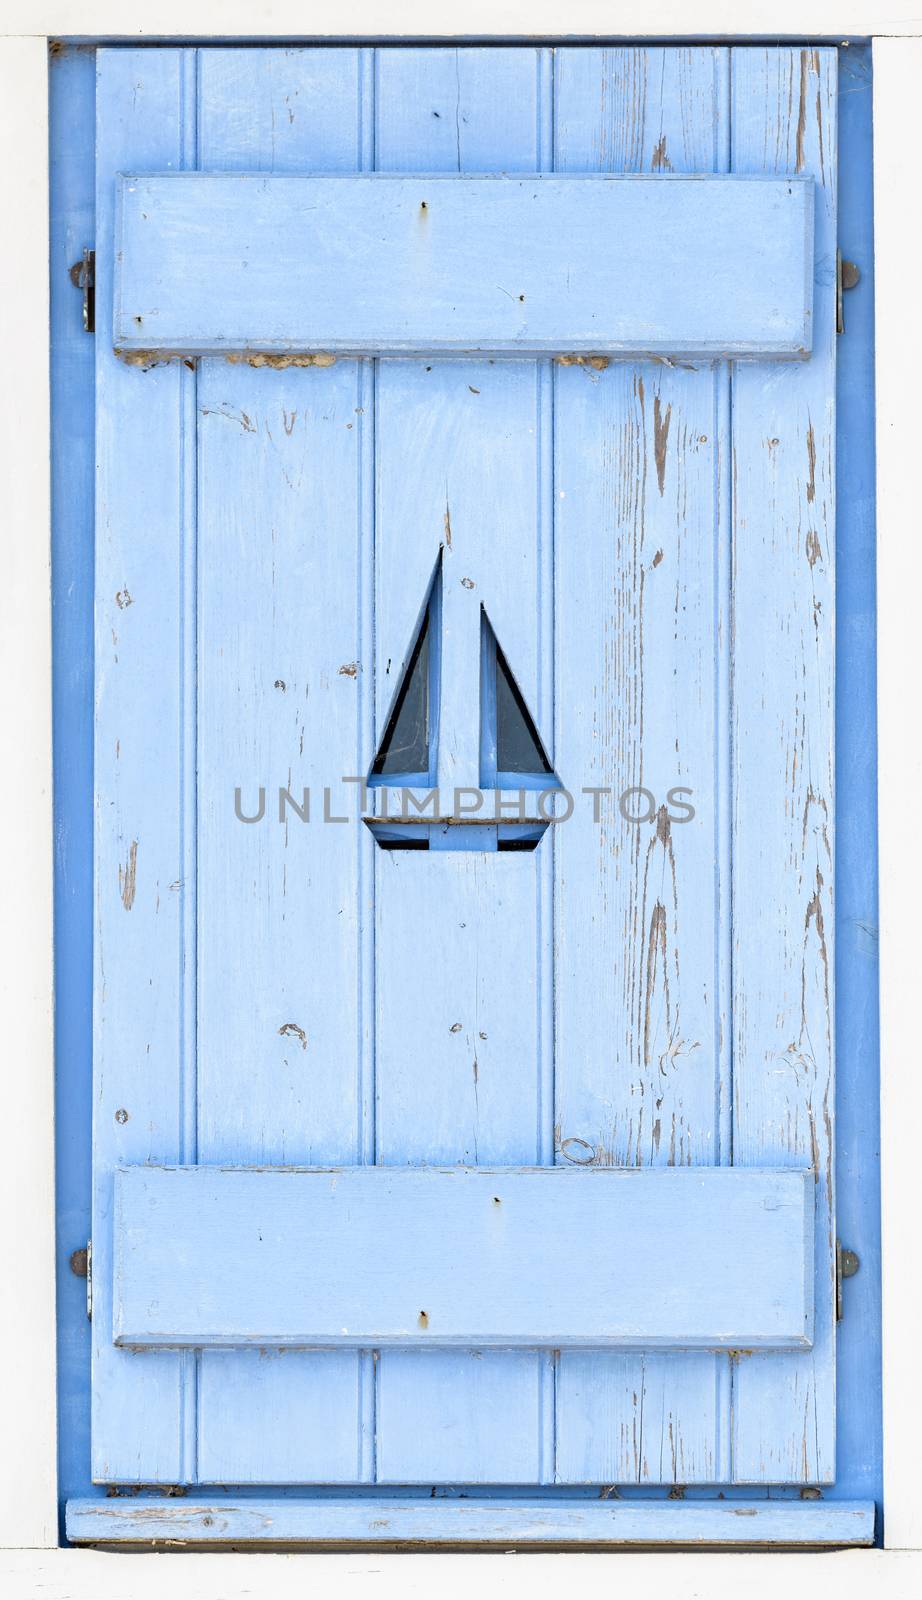 Sail boat on blue wooden shutter